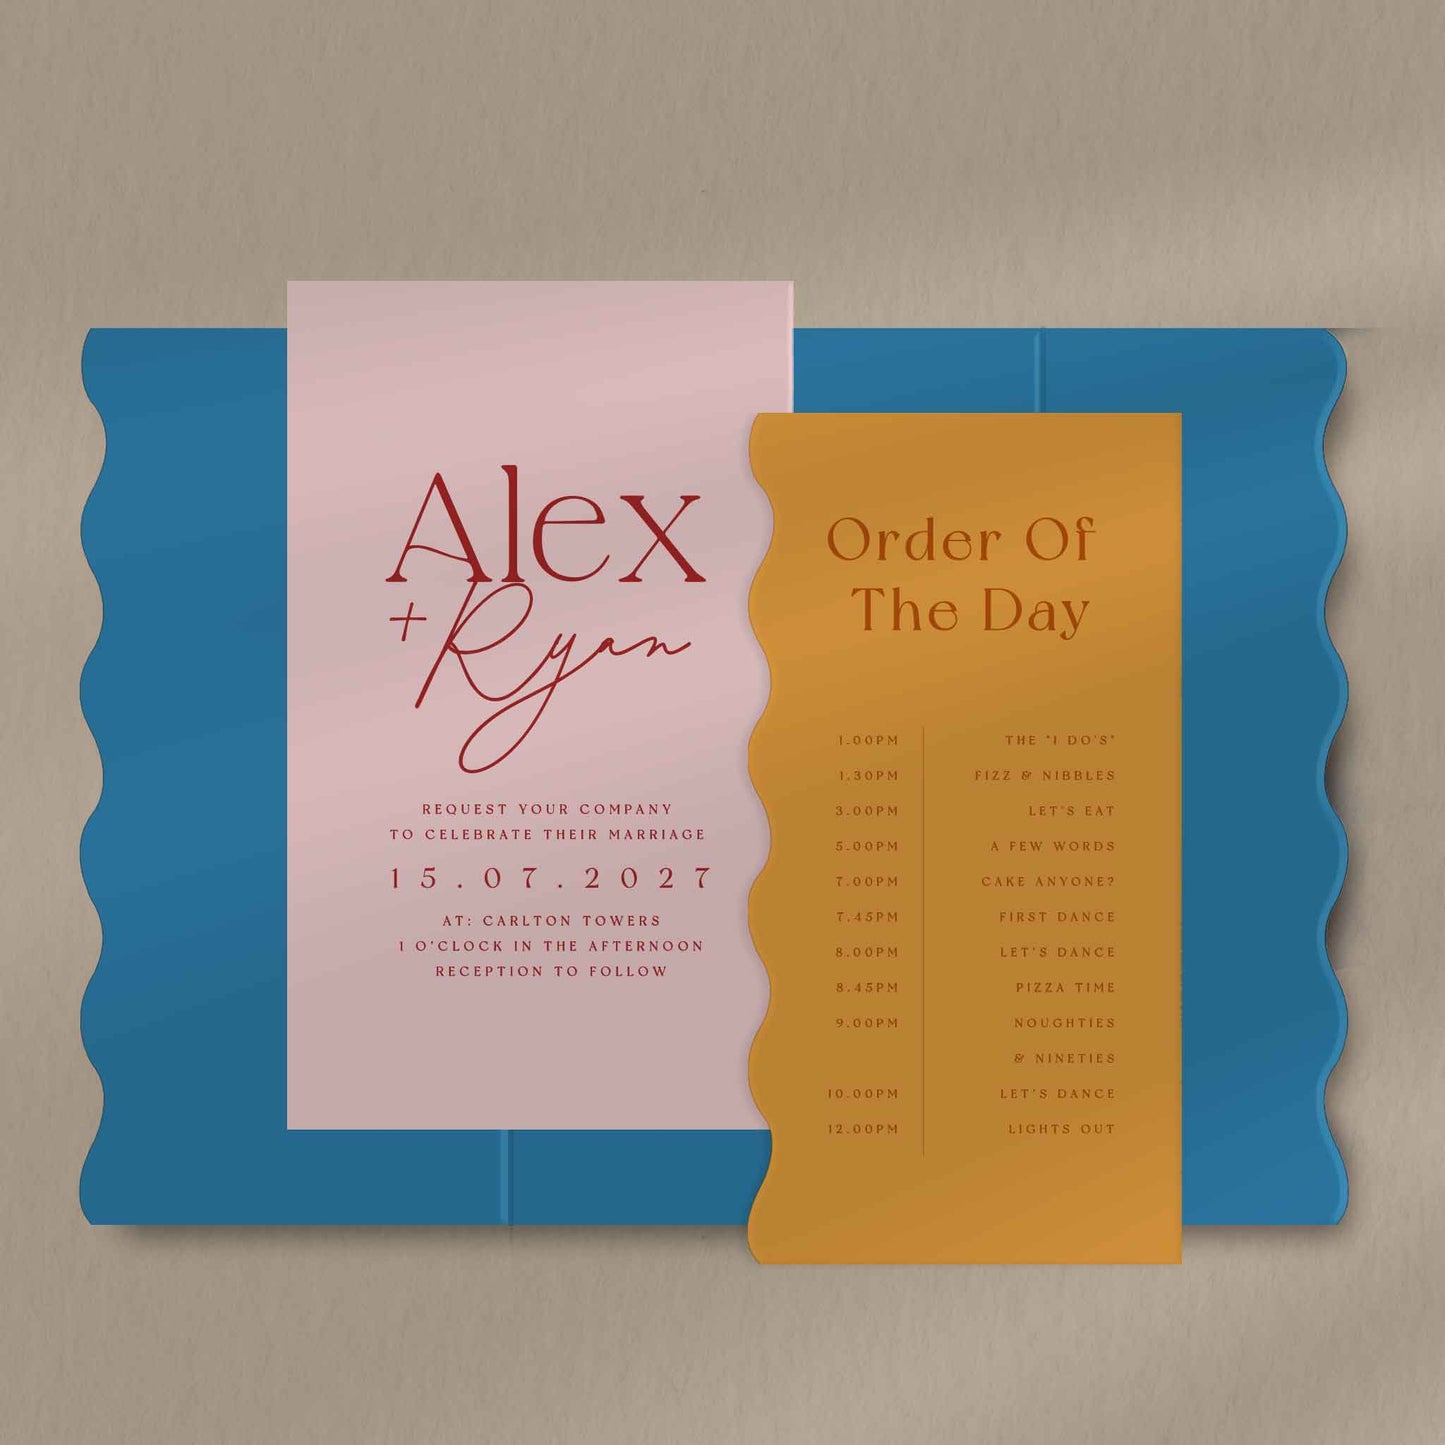 Scallop Envelope Sample  Ivy and Gold Wedding Stationery Alex  